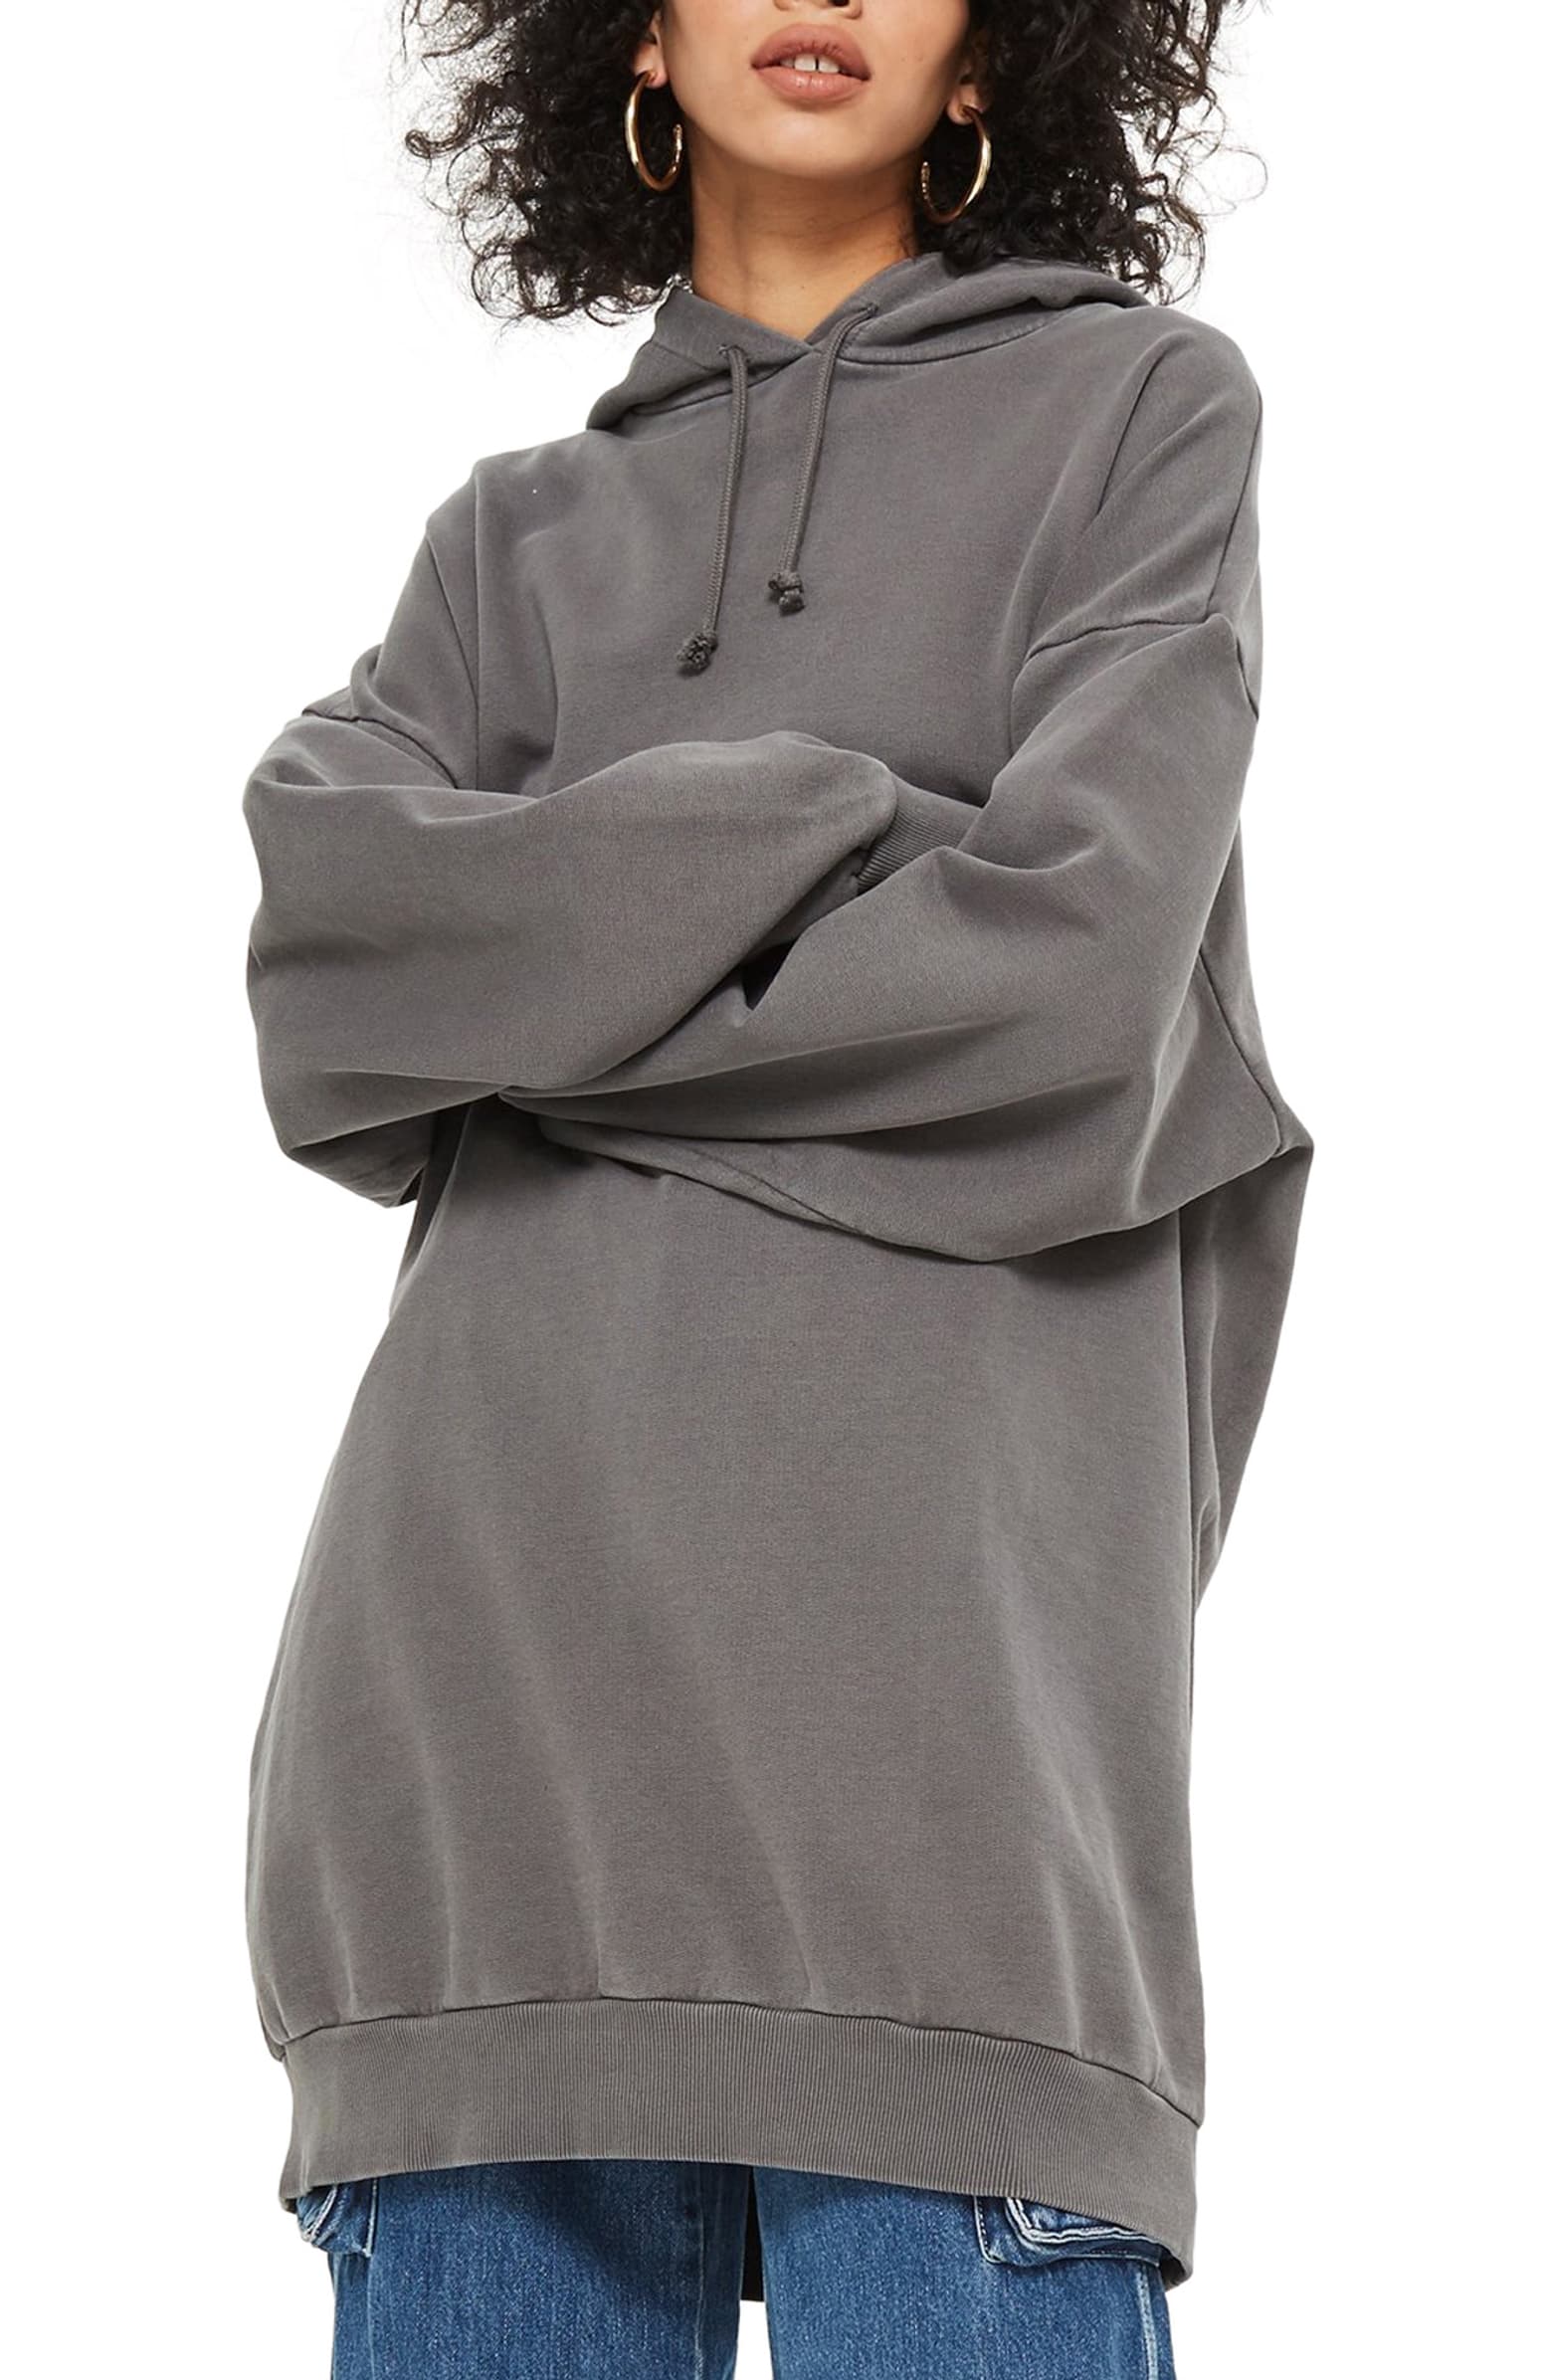 Buy > large hoodie outfit > in stock